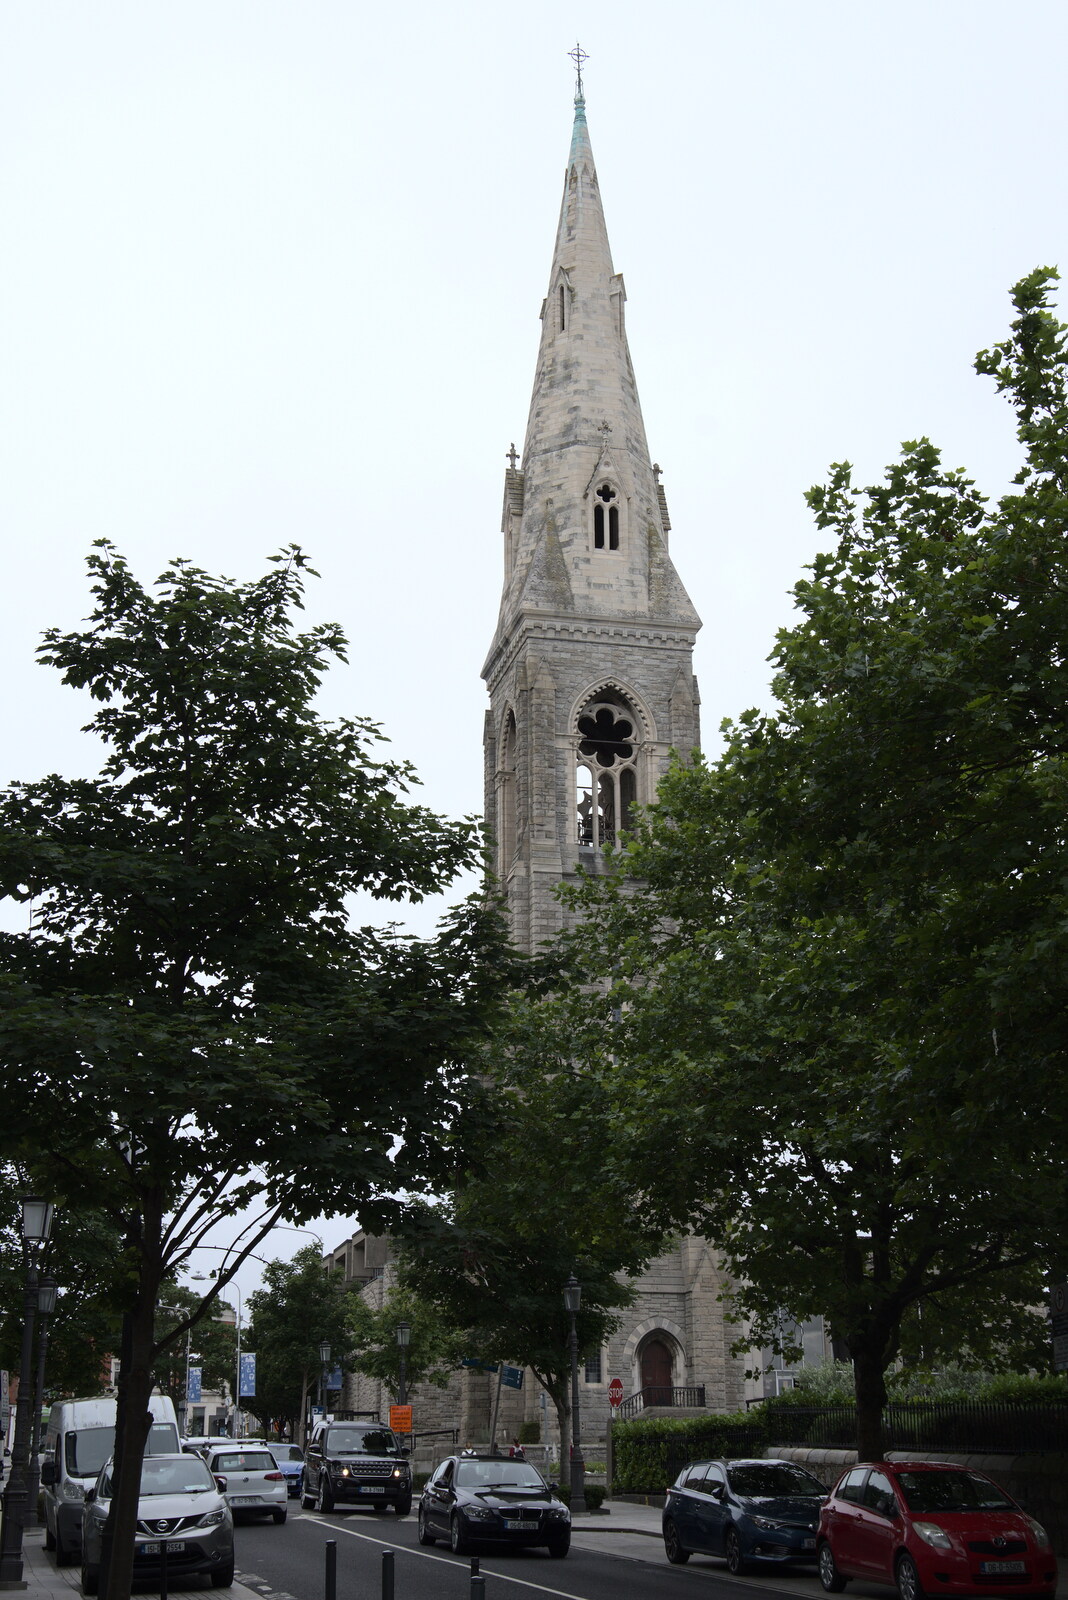 The tower of St. Michael's on Bóthar na Mara from Manorhamilton and the Street Art of Dún Laoghaire, Ireland - 15th August 2021